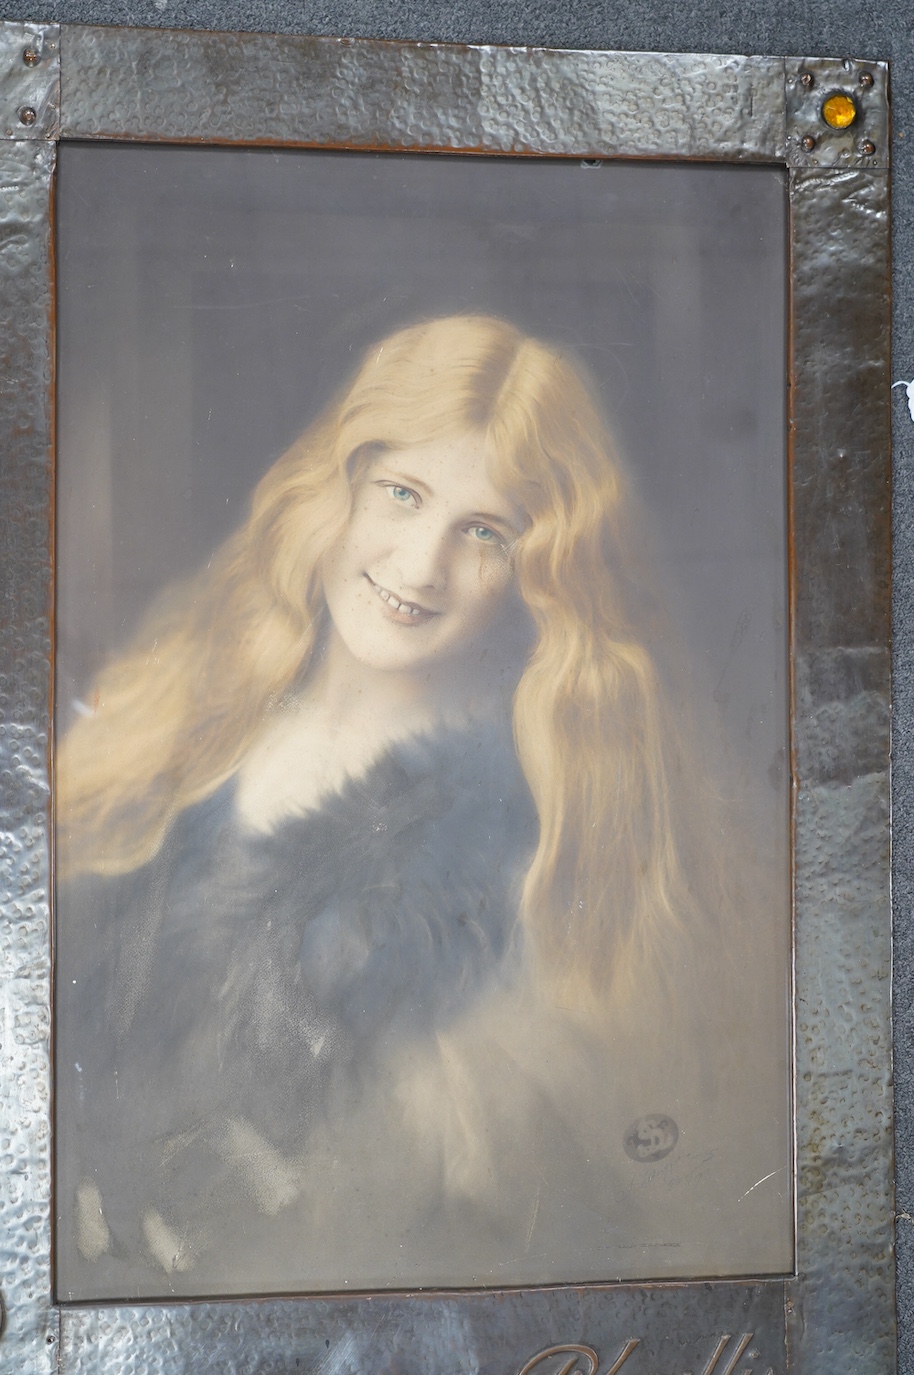 A large Arts & Crafts planished copper frame housing a photograph of Phyllis Dare, an early 20th century actress from Hove, taken by Louis Langfier, overall 100 x 70cm. Condition - fair to good